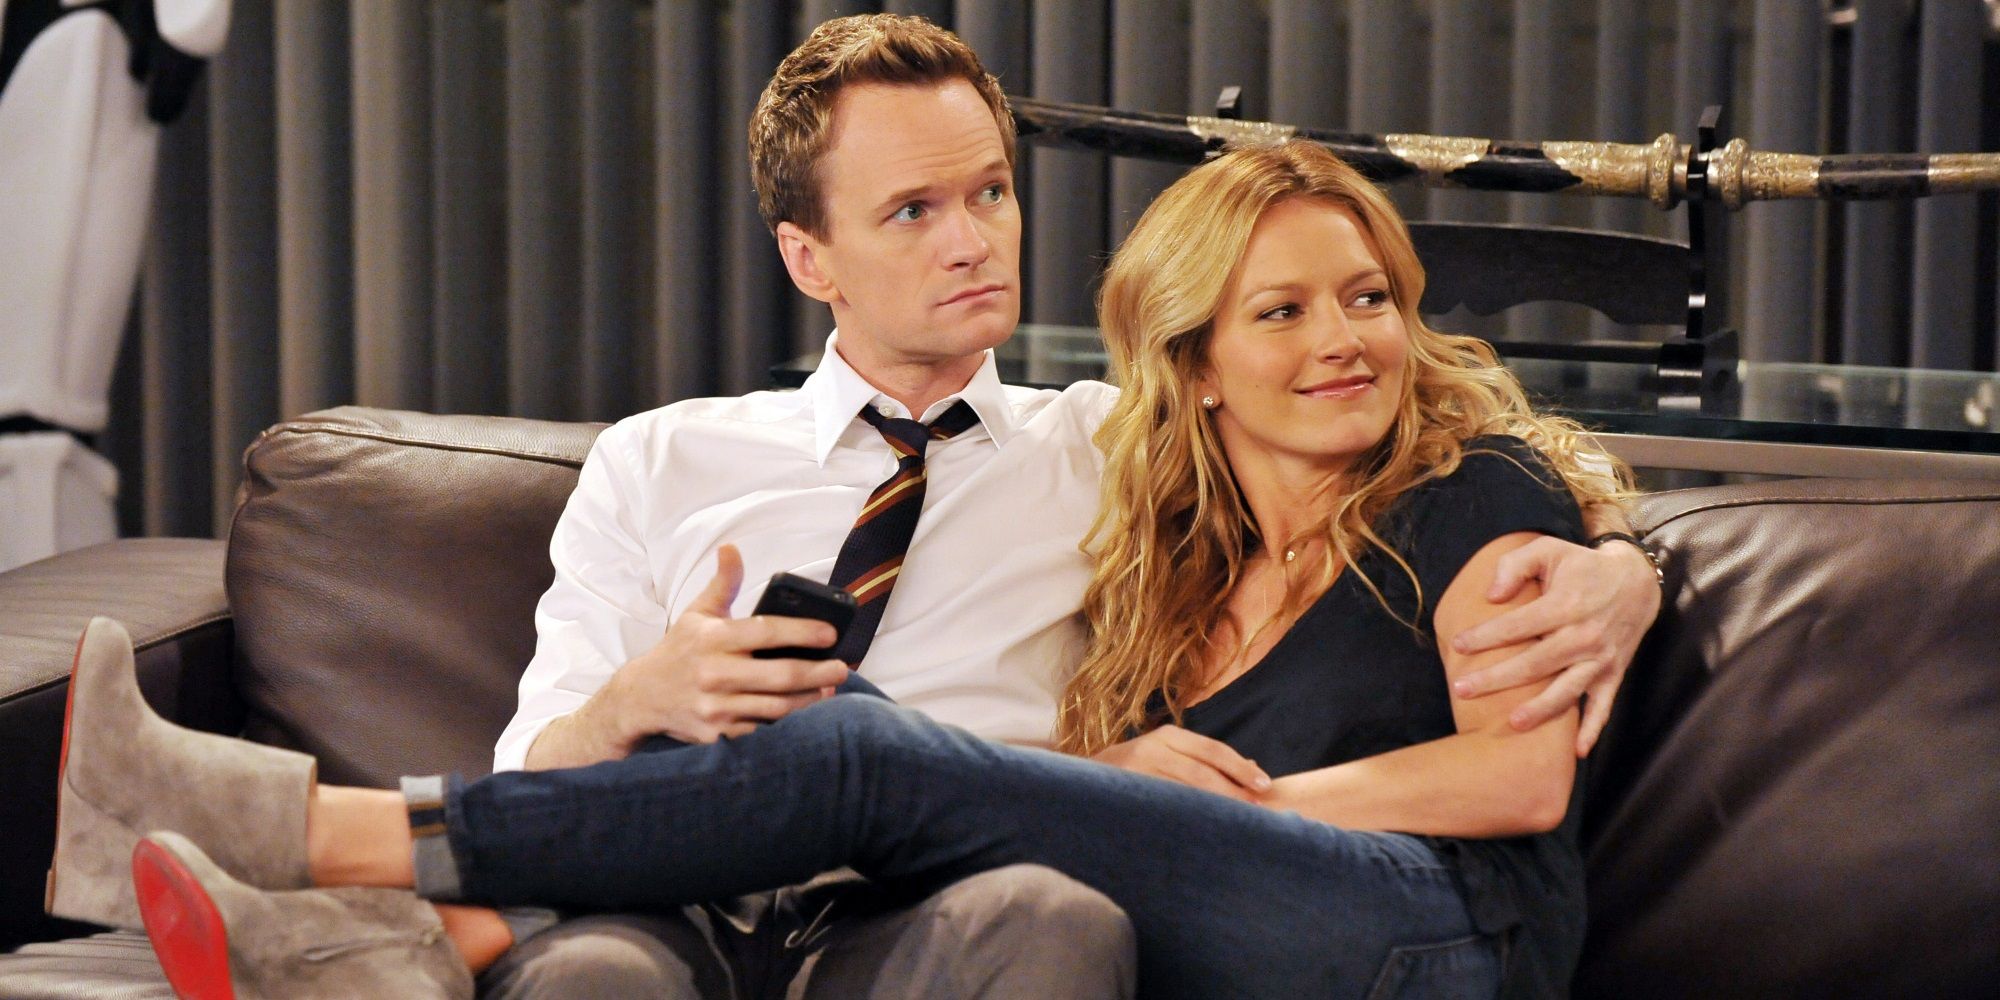 Barney and quinn sitting next to each other on a couch